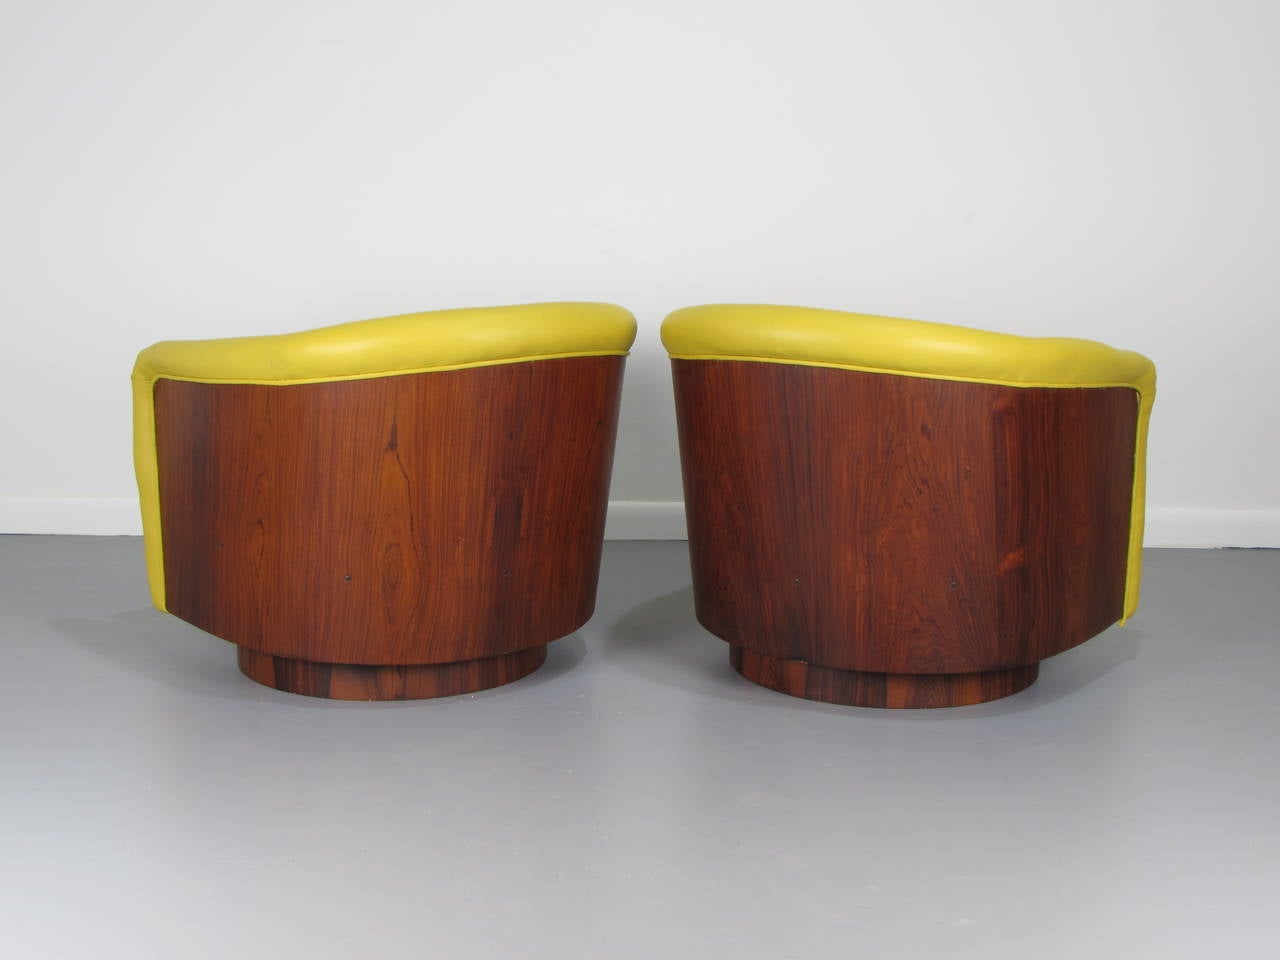 Rare rosewood wrapped swivel tub chairs in leather by Milo Baughman, 1970s.

We offer free regular deliveries to NYC and Philadelphia area. Delivery to DC, MD, CT and MA are available if schedule permits, please message for a location-based